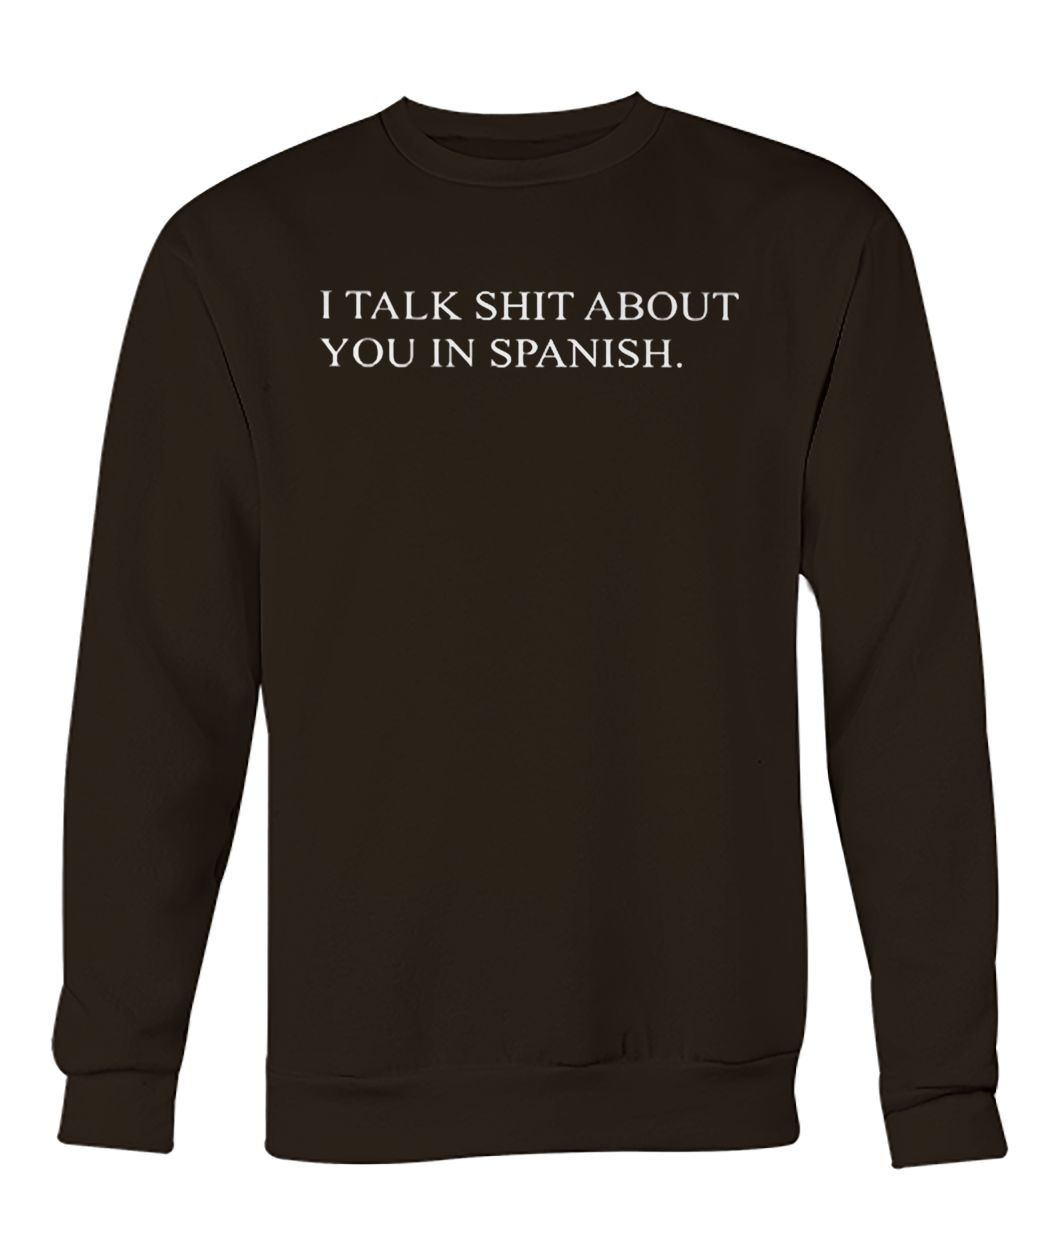 I talk shit about you in spanish crew neck sweatshirt